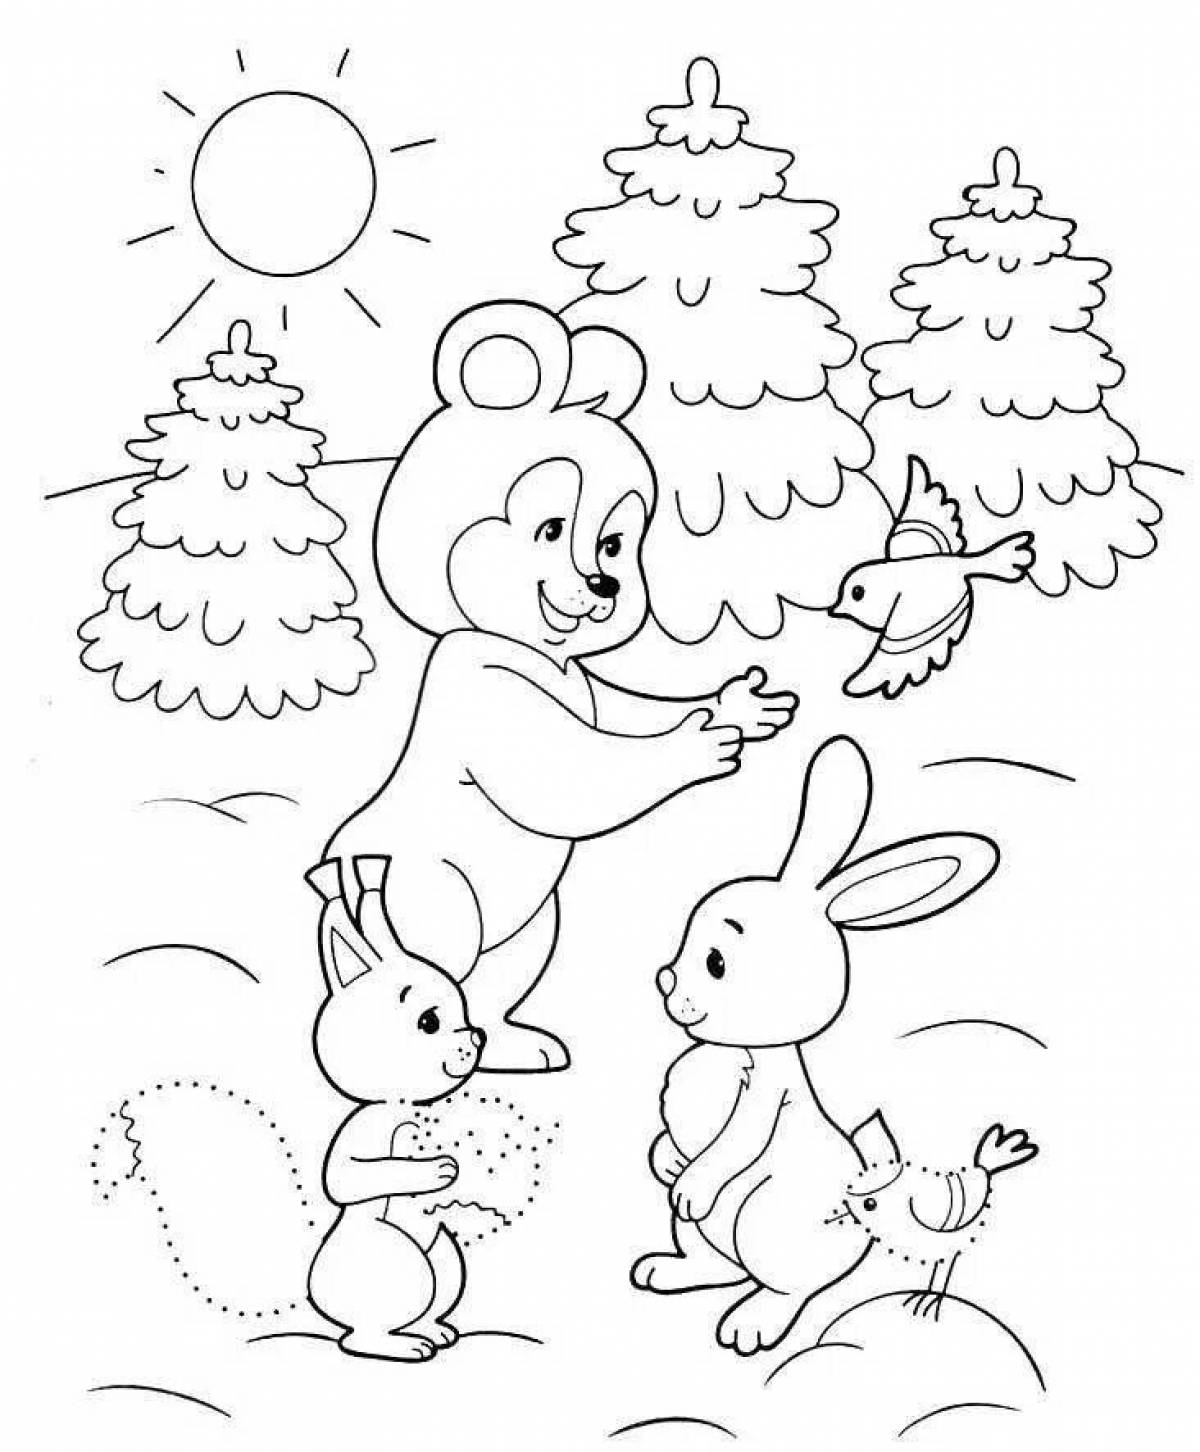 Whimsical coloring book for kids winter forest 3 4 years old